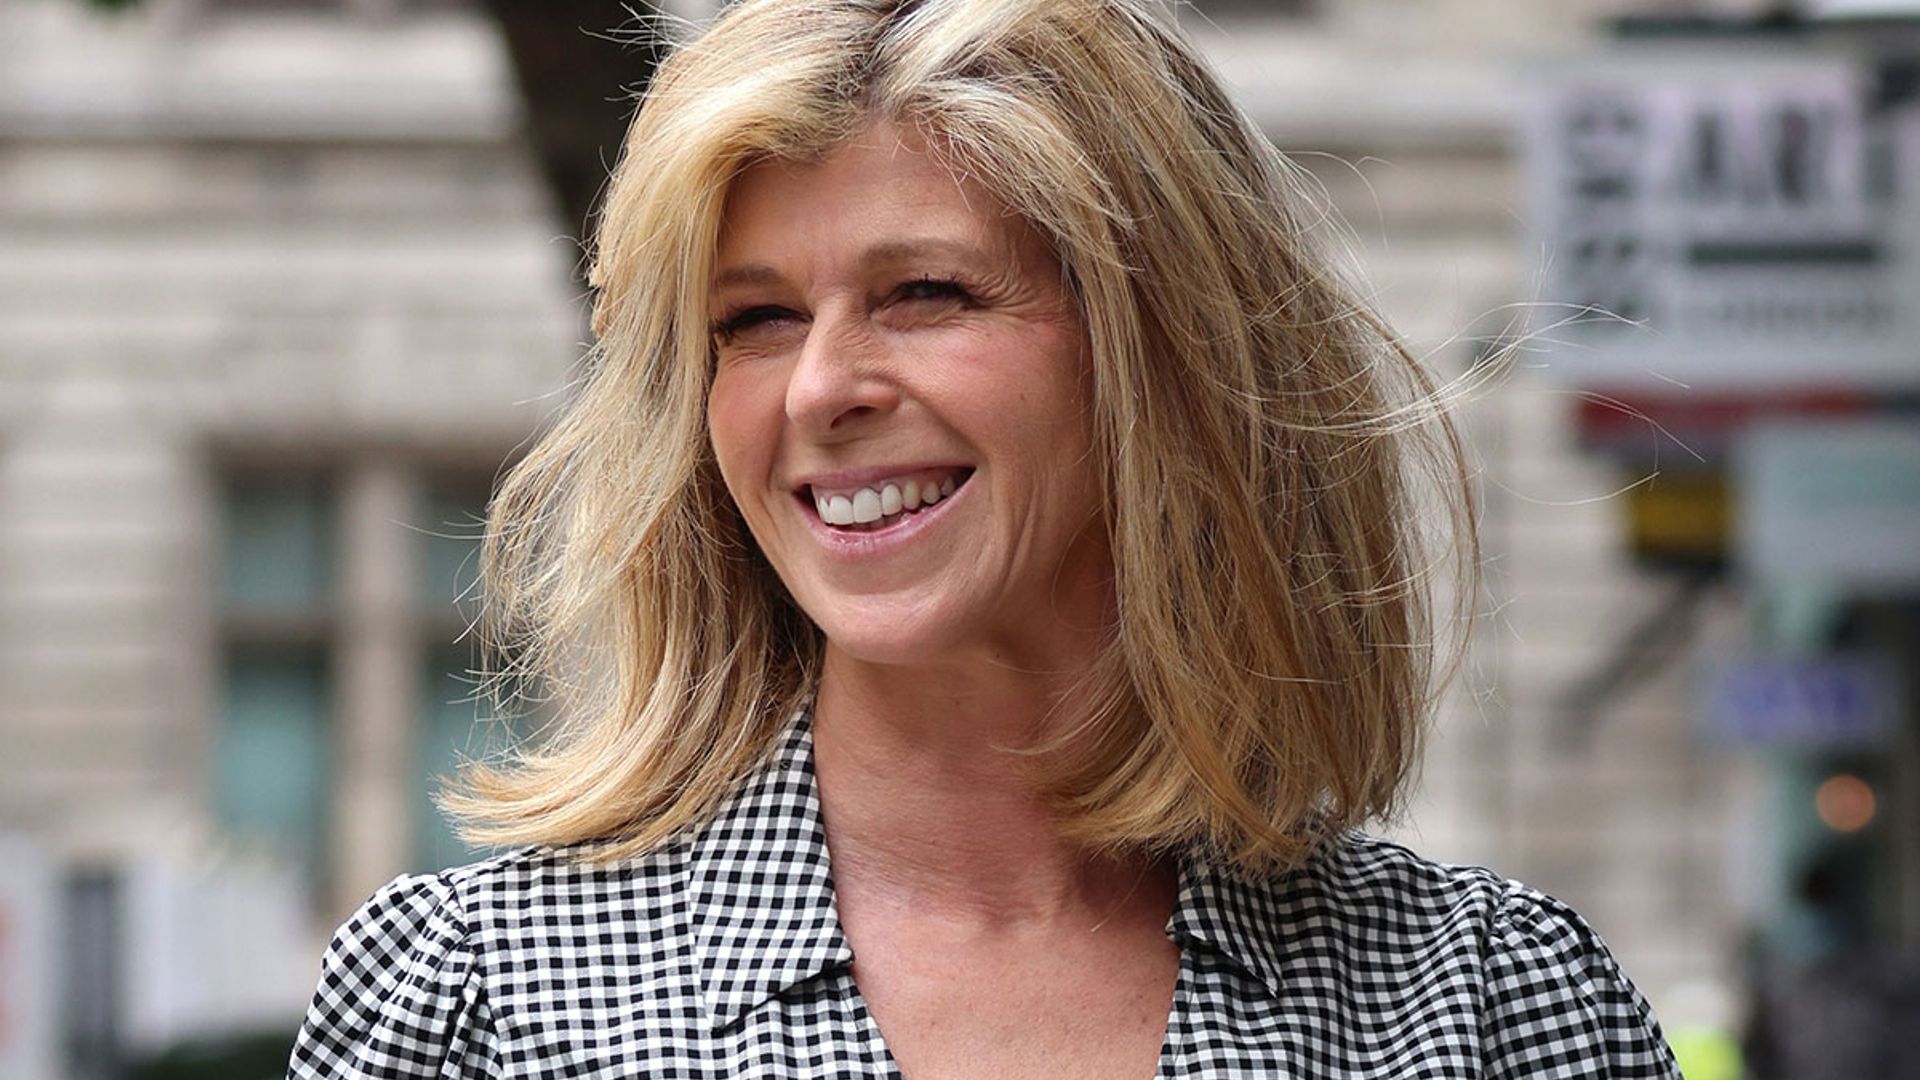 Kate Garraway's wrap dress is so flattering – and she looks amazing